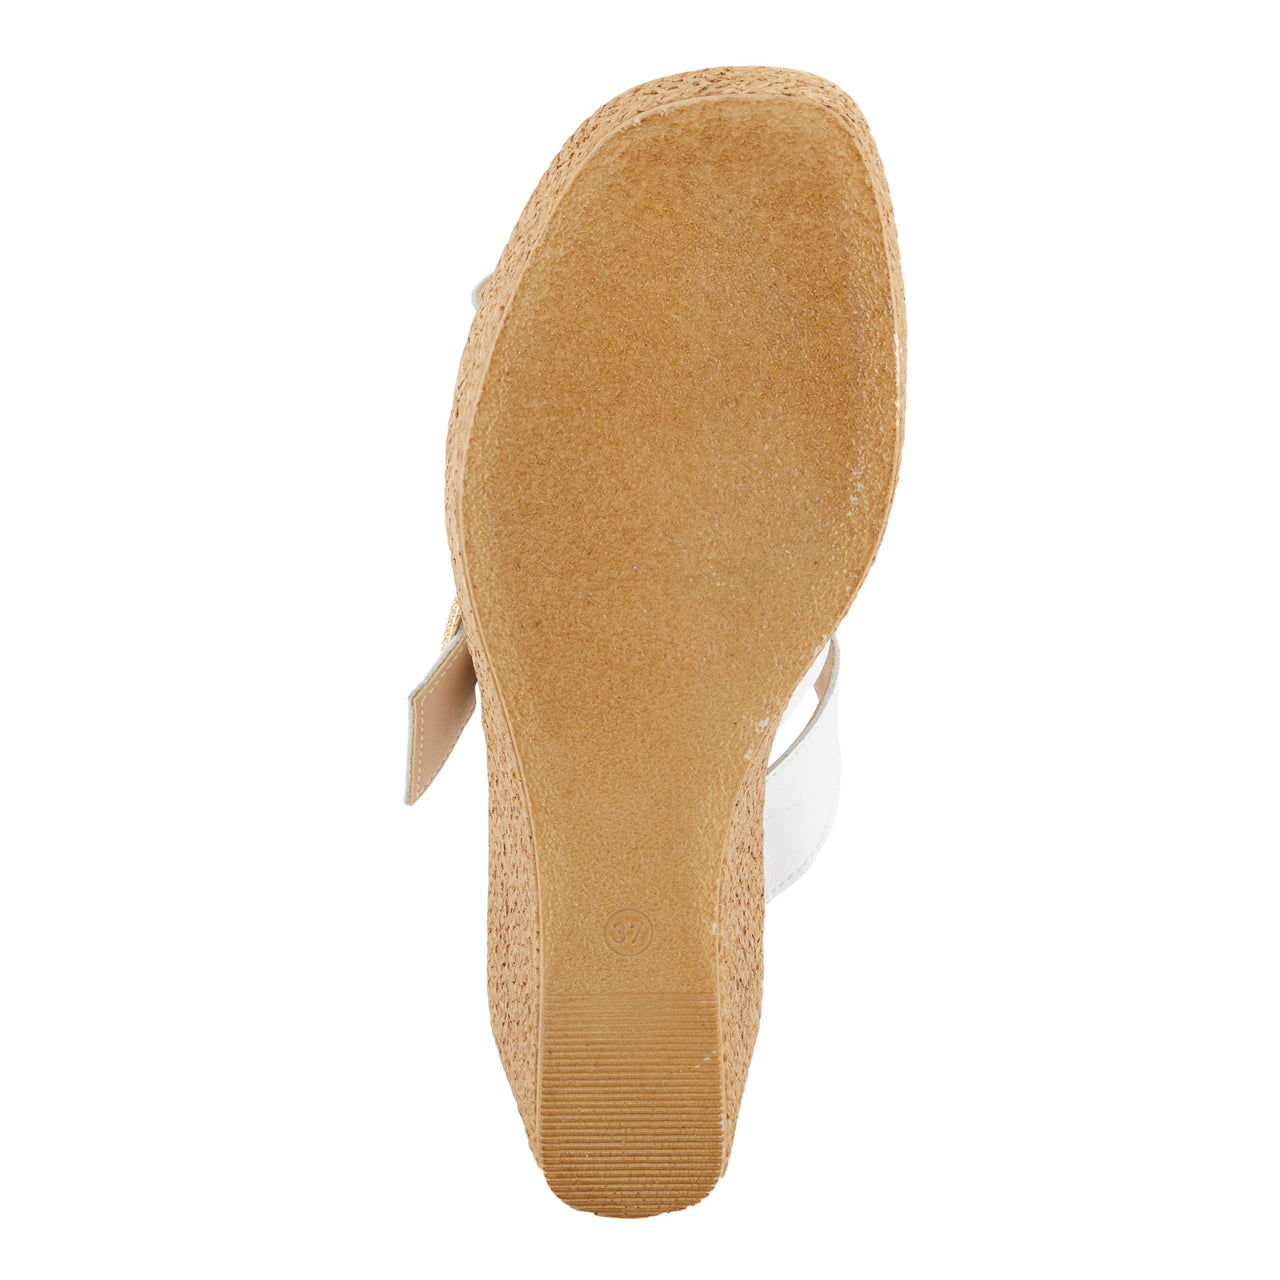  Spring Step Mares Sandals in white leather with soft textile lining and padded footbed